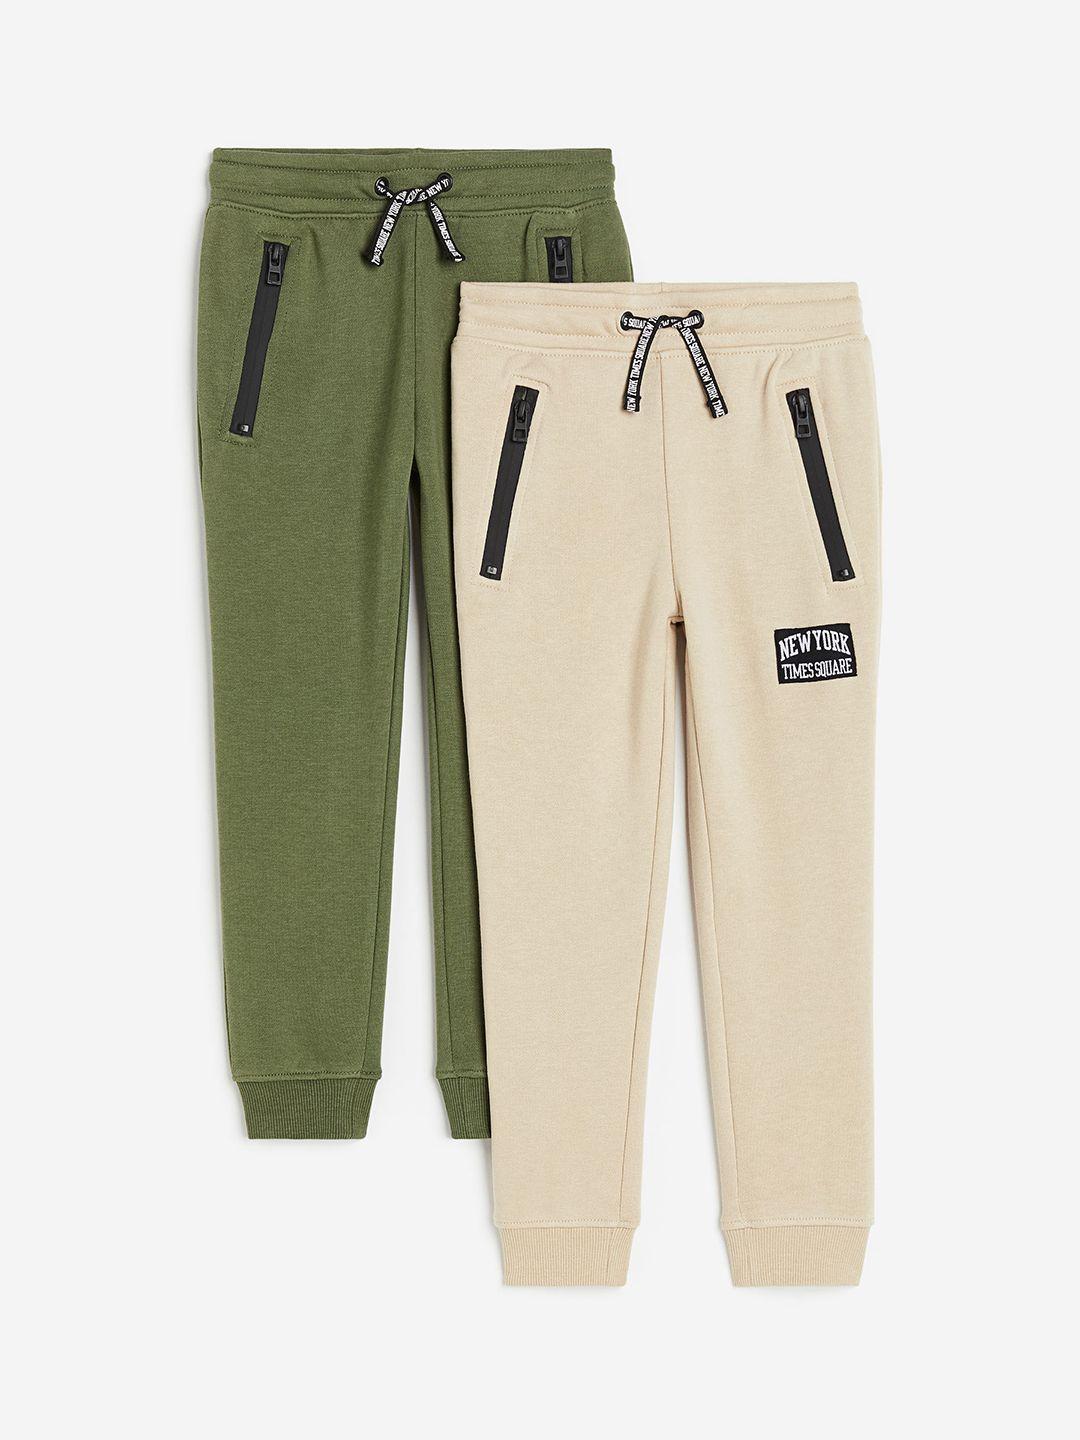 h&m kids-boys pack of 2 patchwork joggers